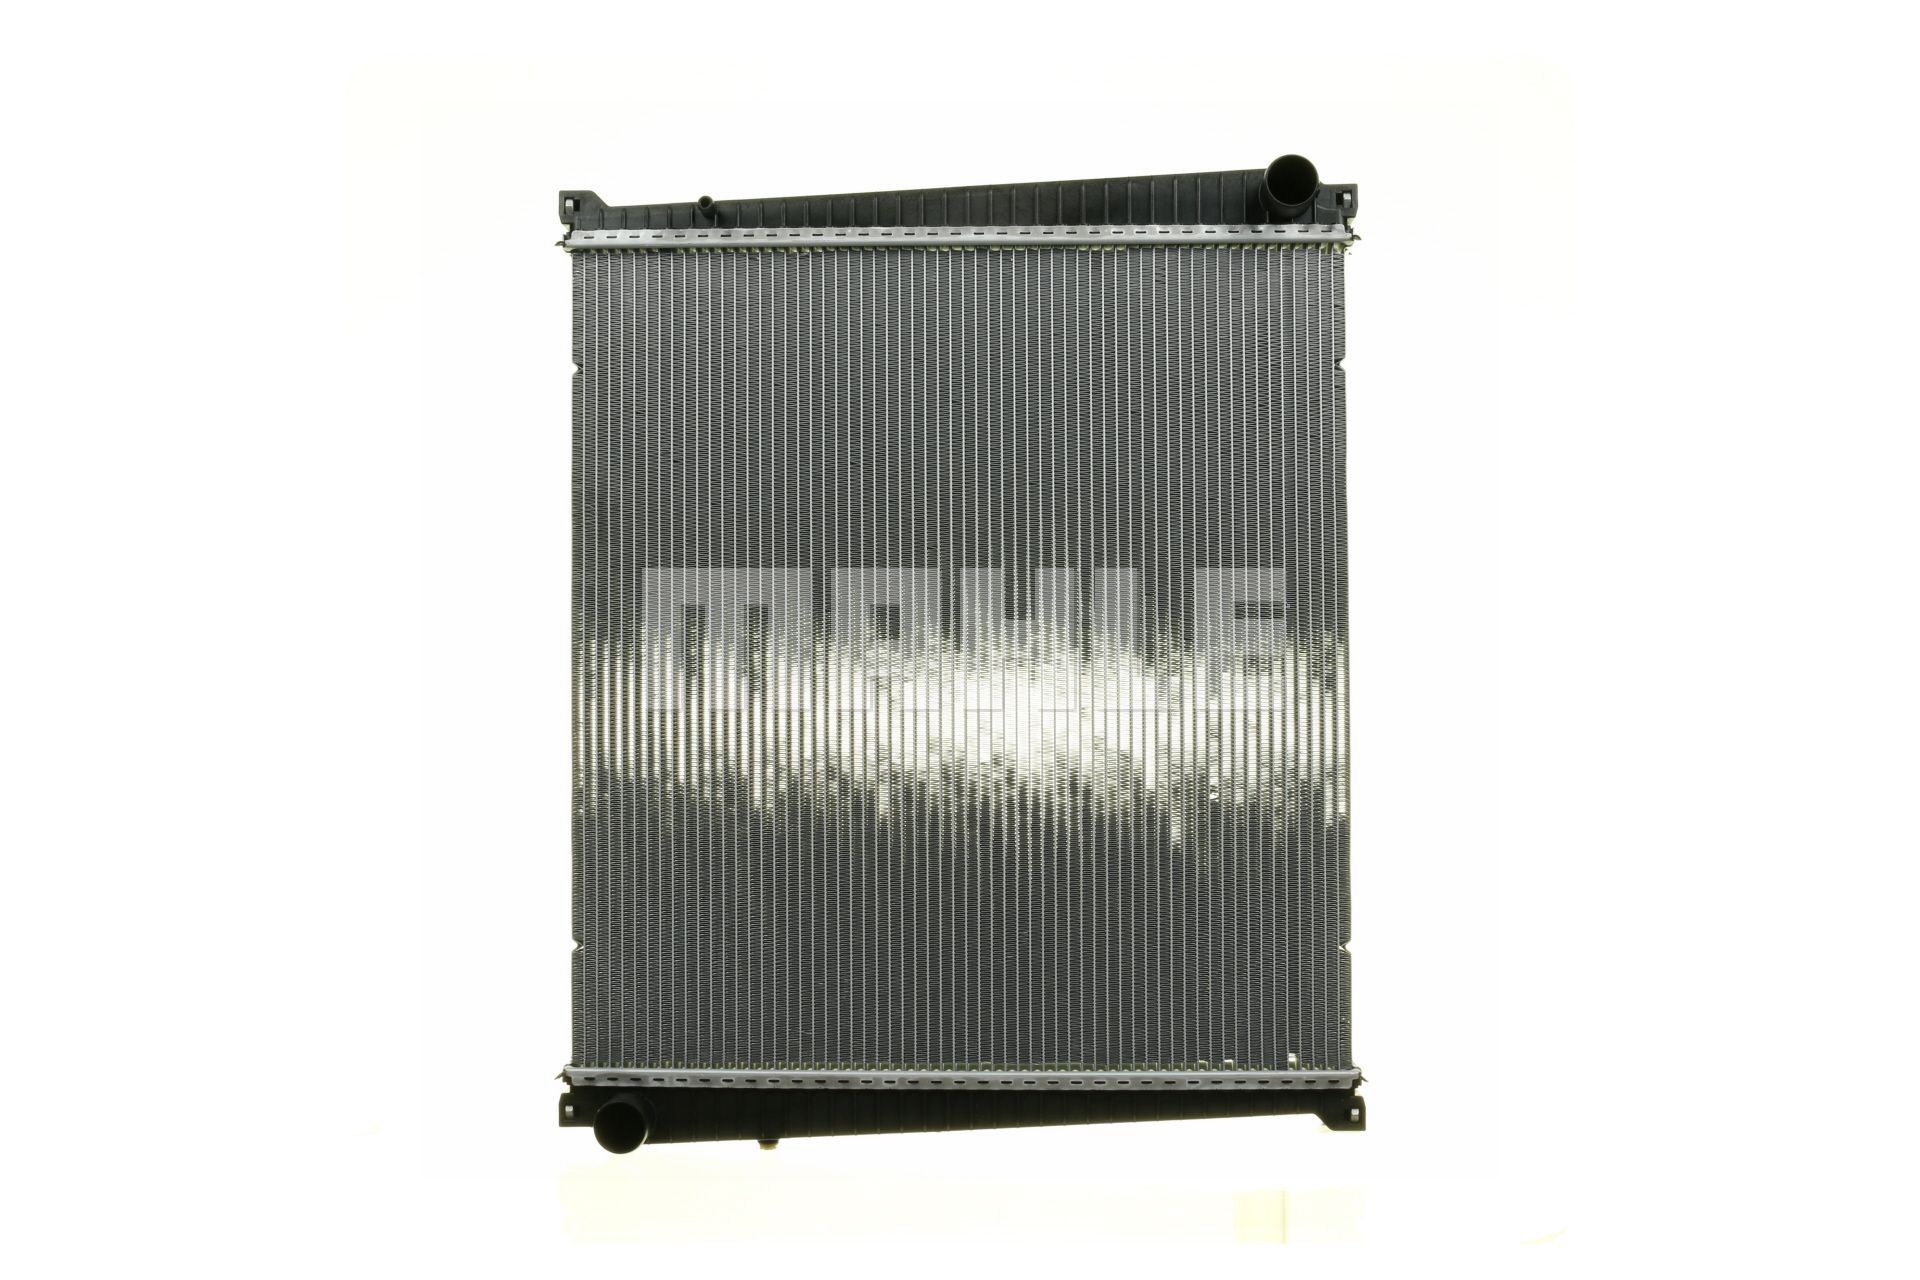 MAHLE ORIGINAL CR 818 000P Engine radiator 623 x 590 x 40 mm, without frame, Brazed cooling fins